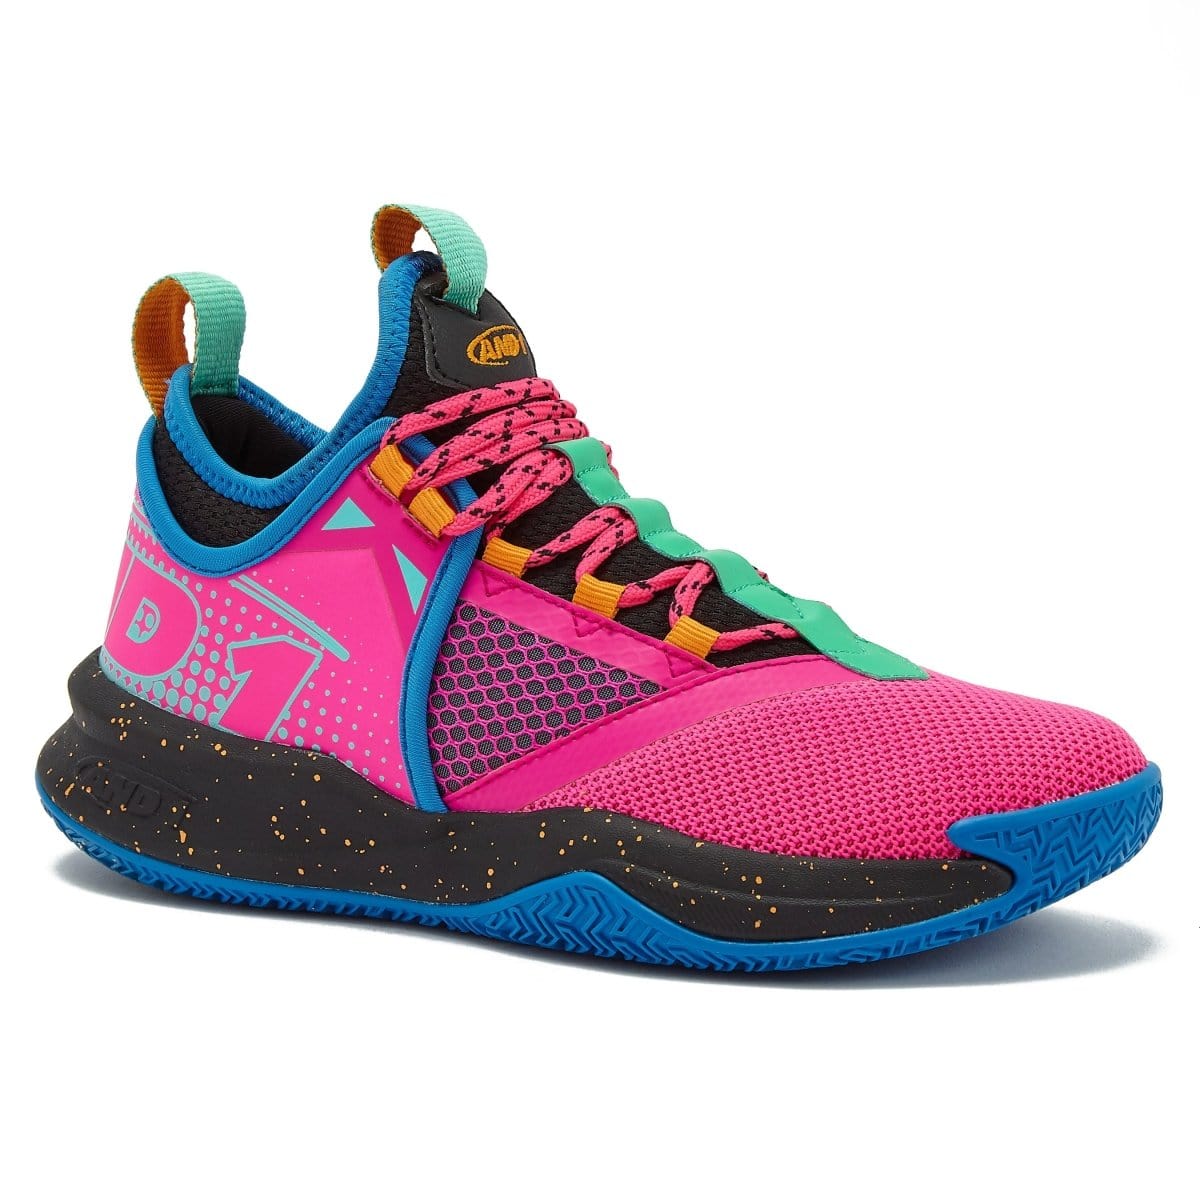 AND-1 AND-1 JUNIOR CHARGE PINK BASKETBALL SHOES - INSPORT